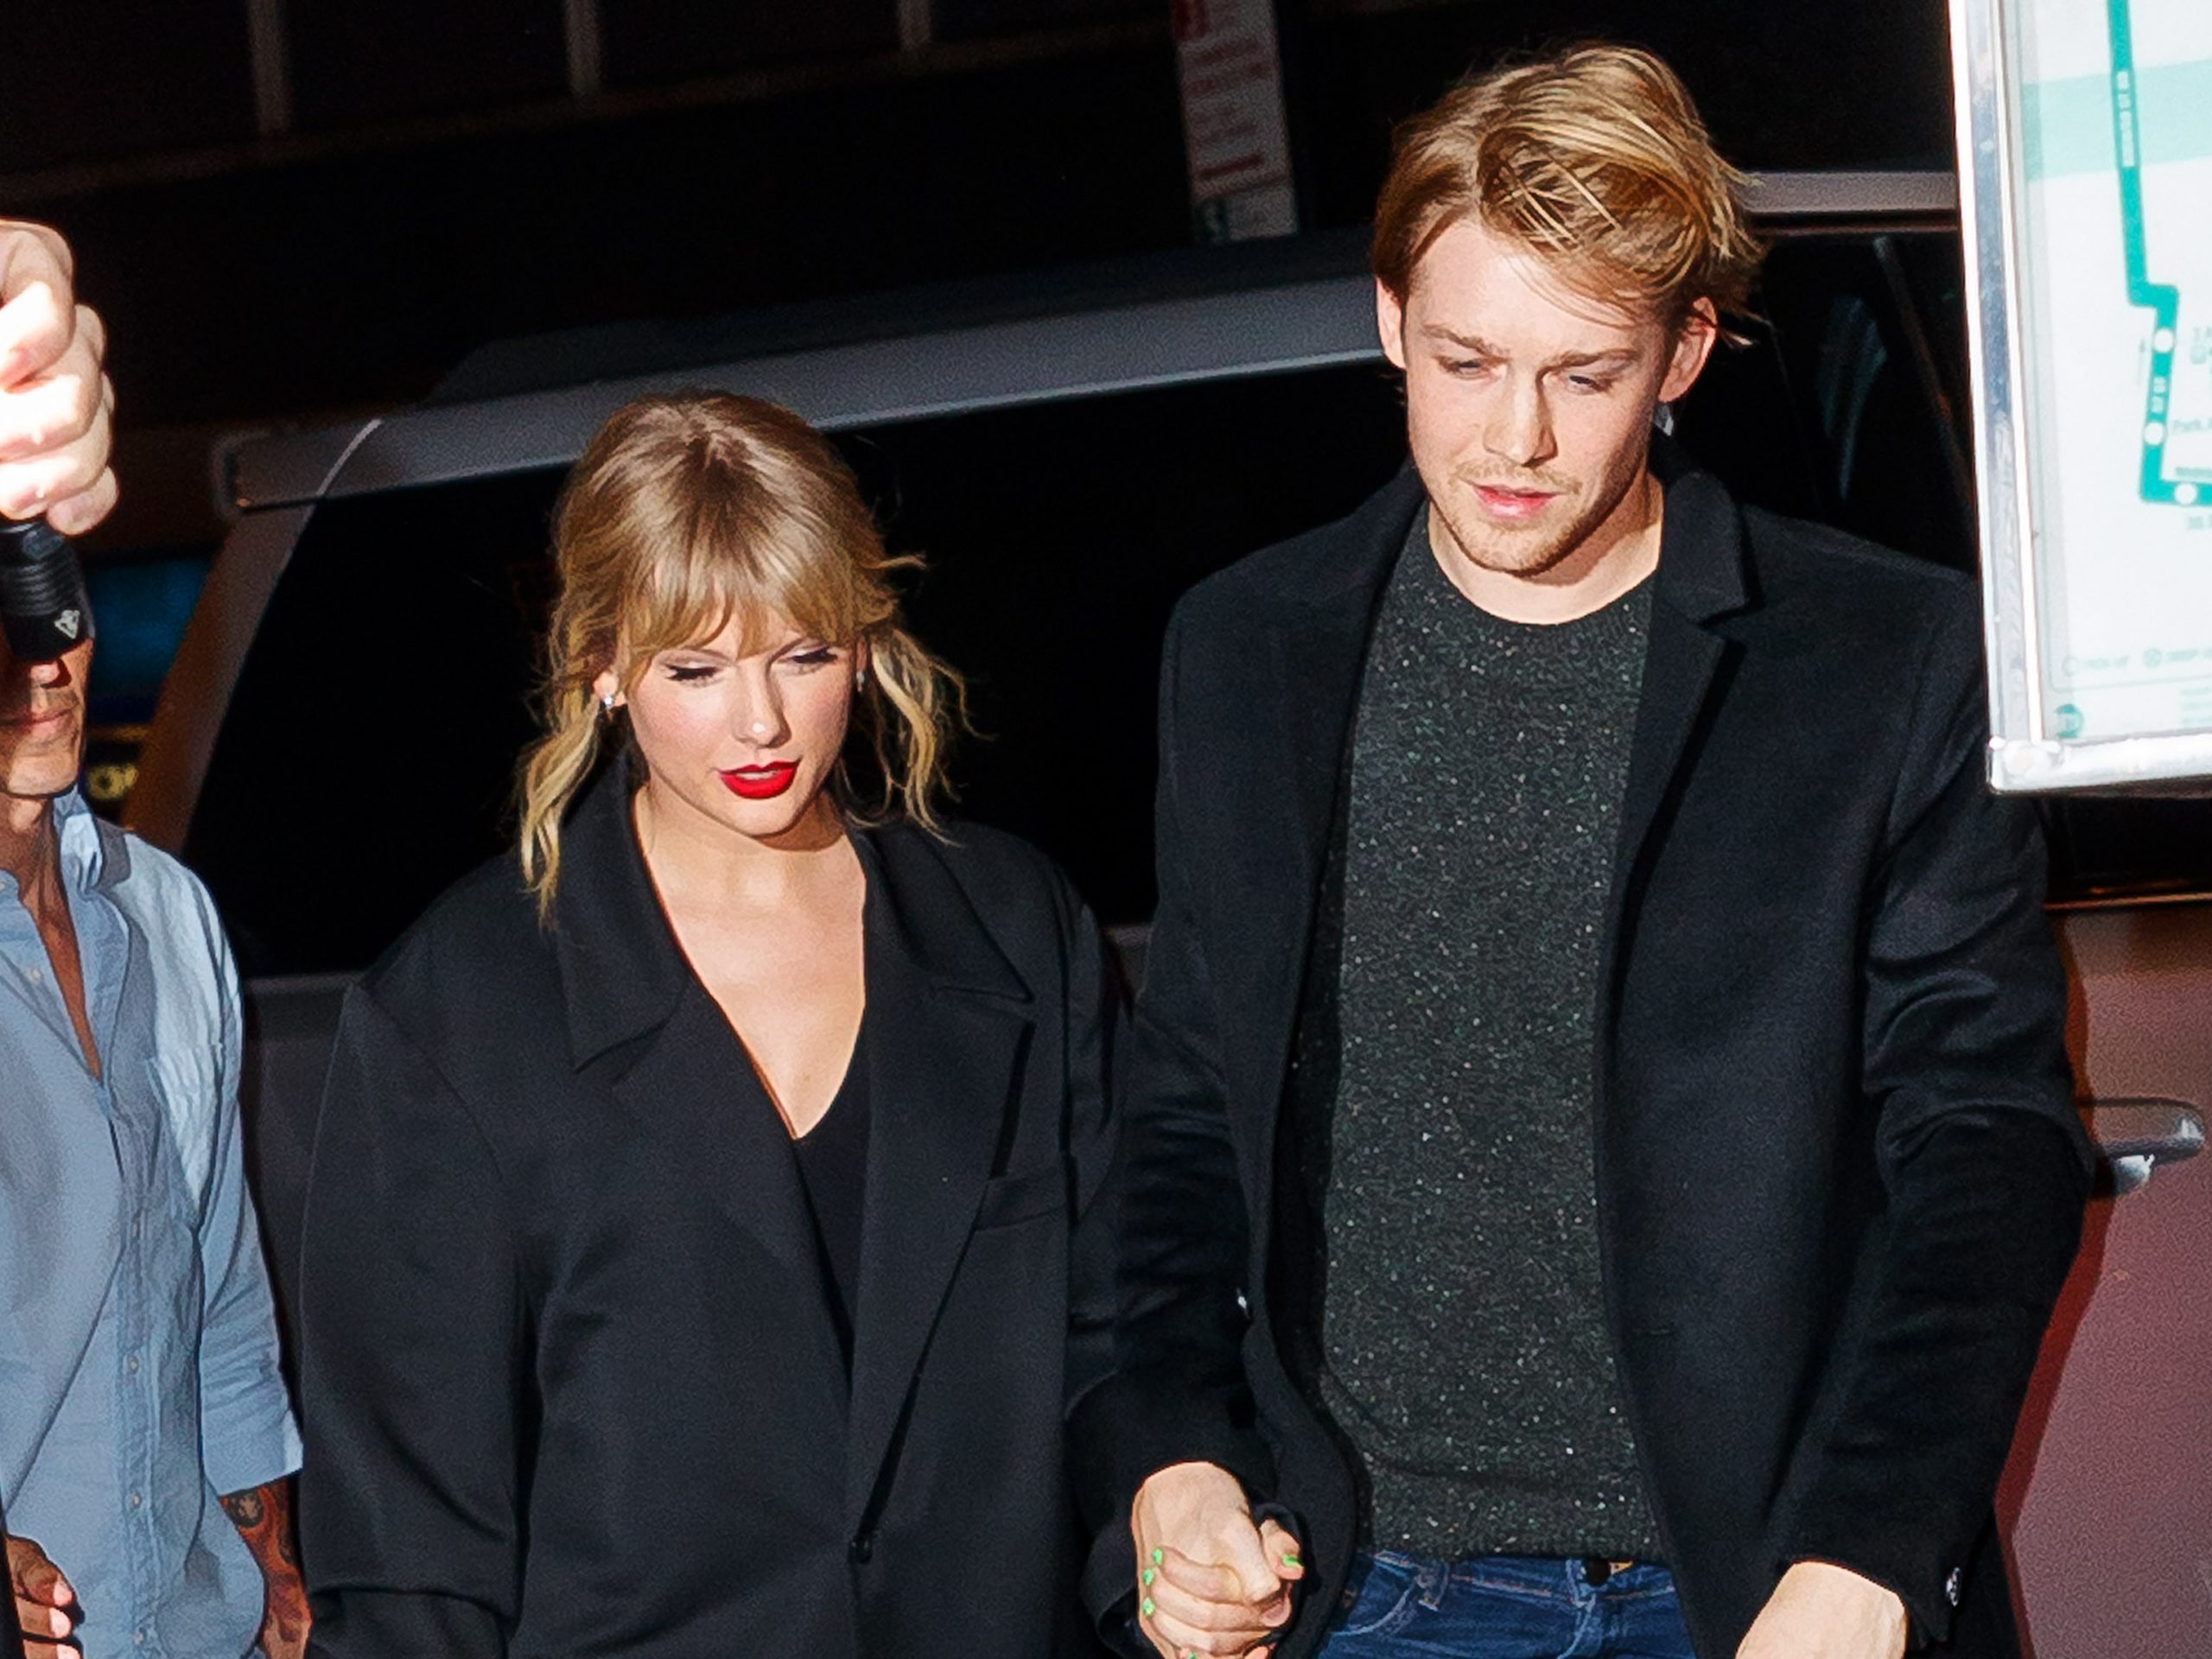 Taylor Swift Leaving Hints to Joe Alwyn To Propose Before It’s Too Late?